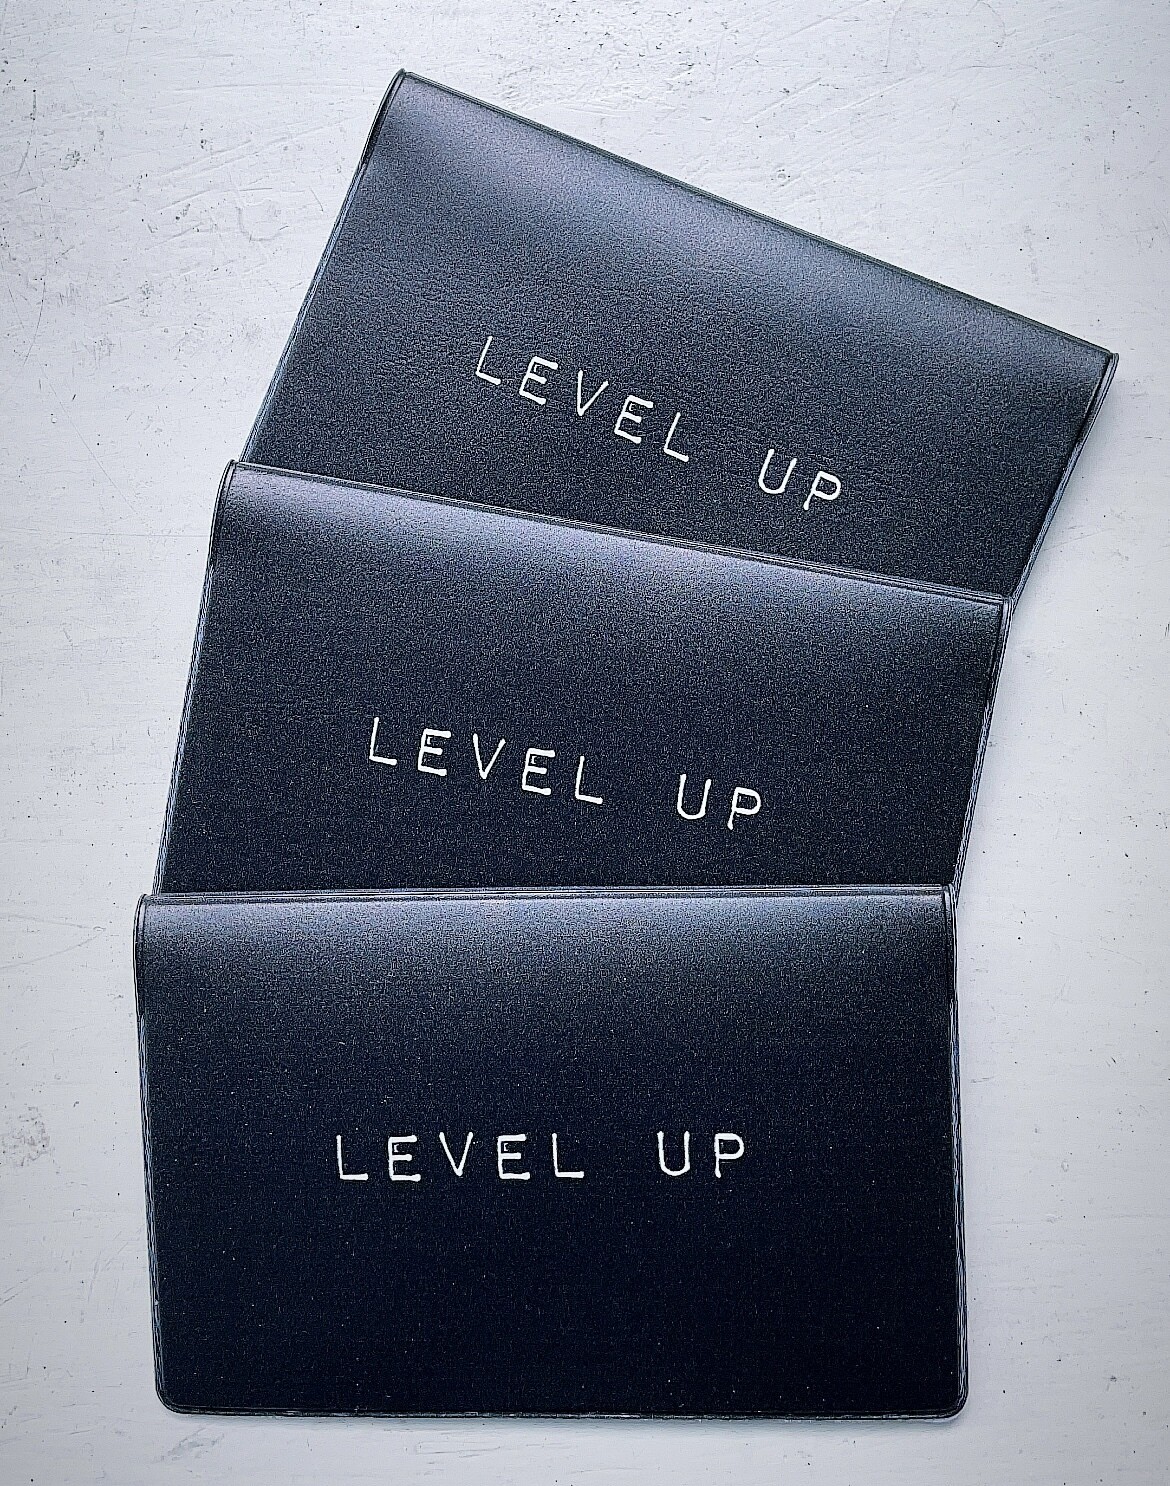 LEVEL UP 3-pack. Spara 14%!